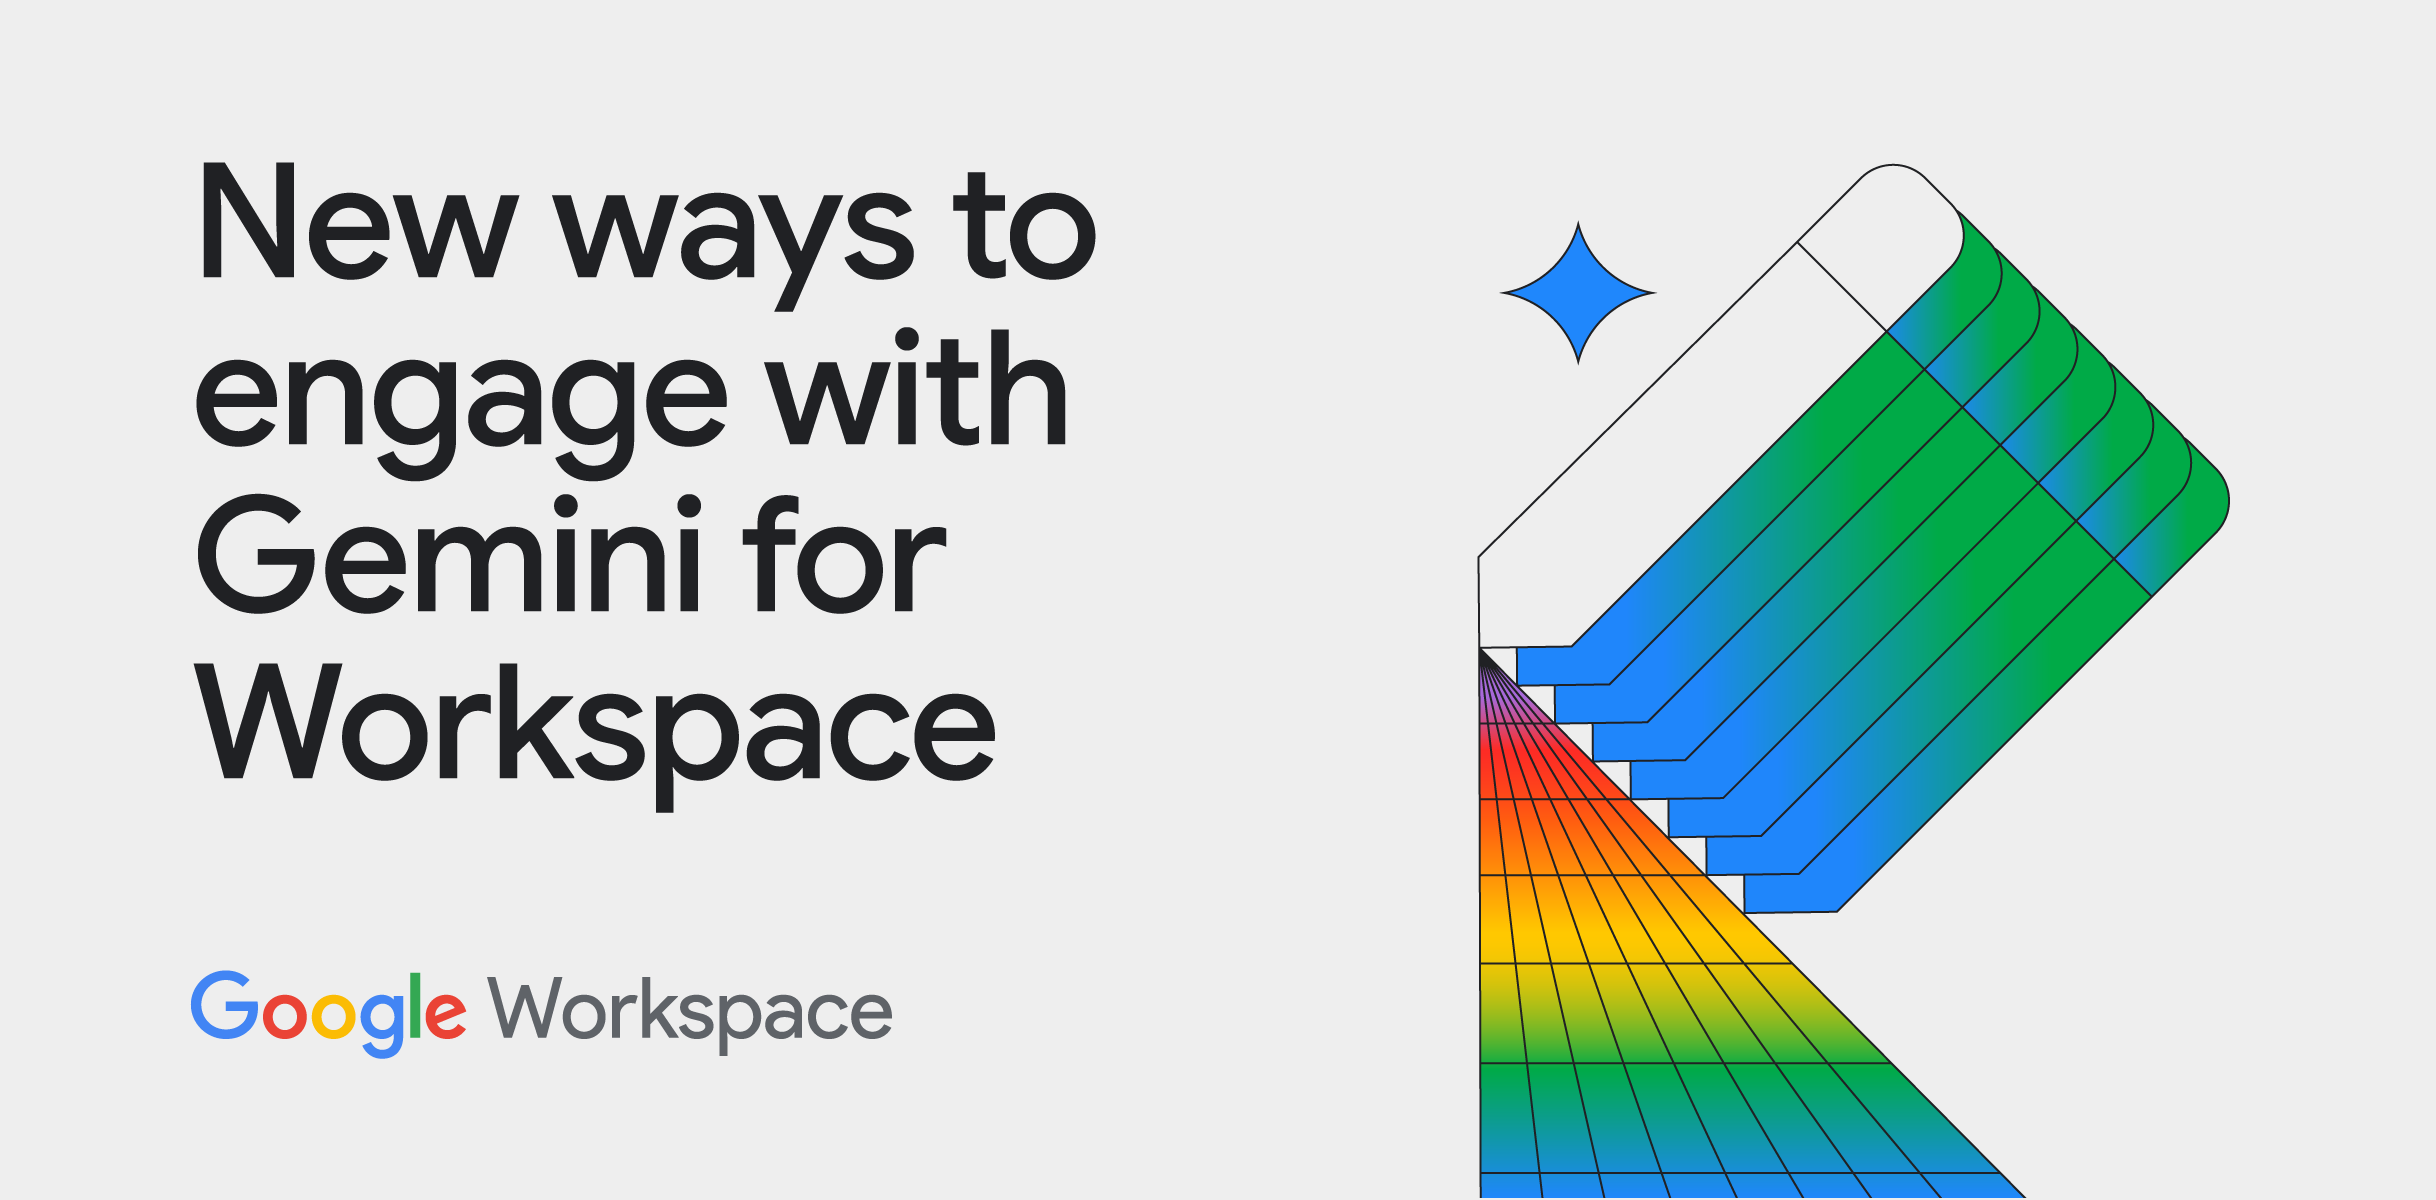 New ways to engage Gemini for Workspace